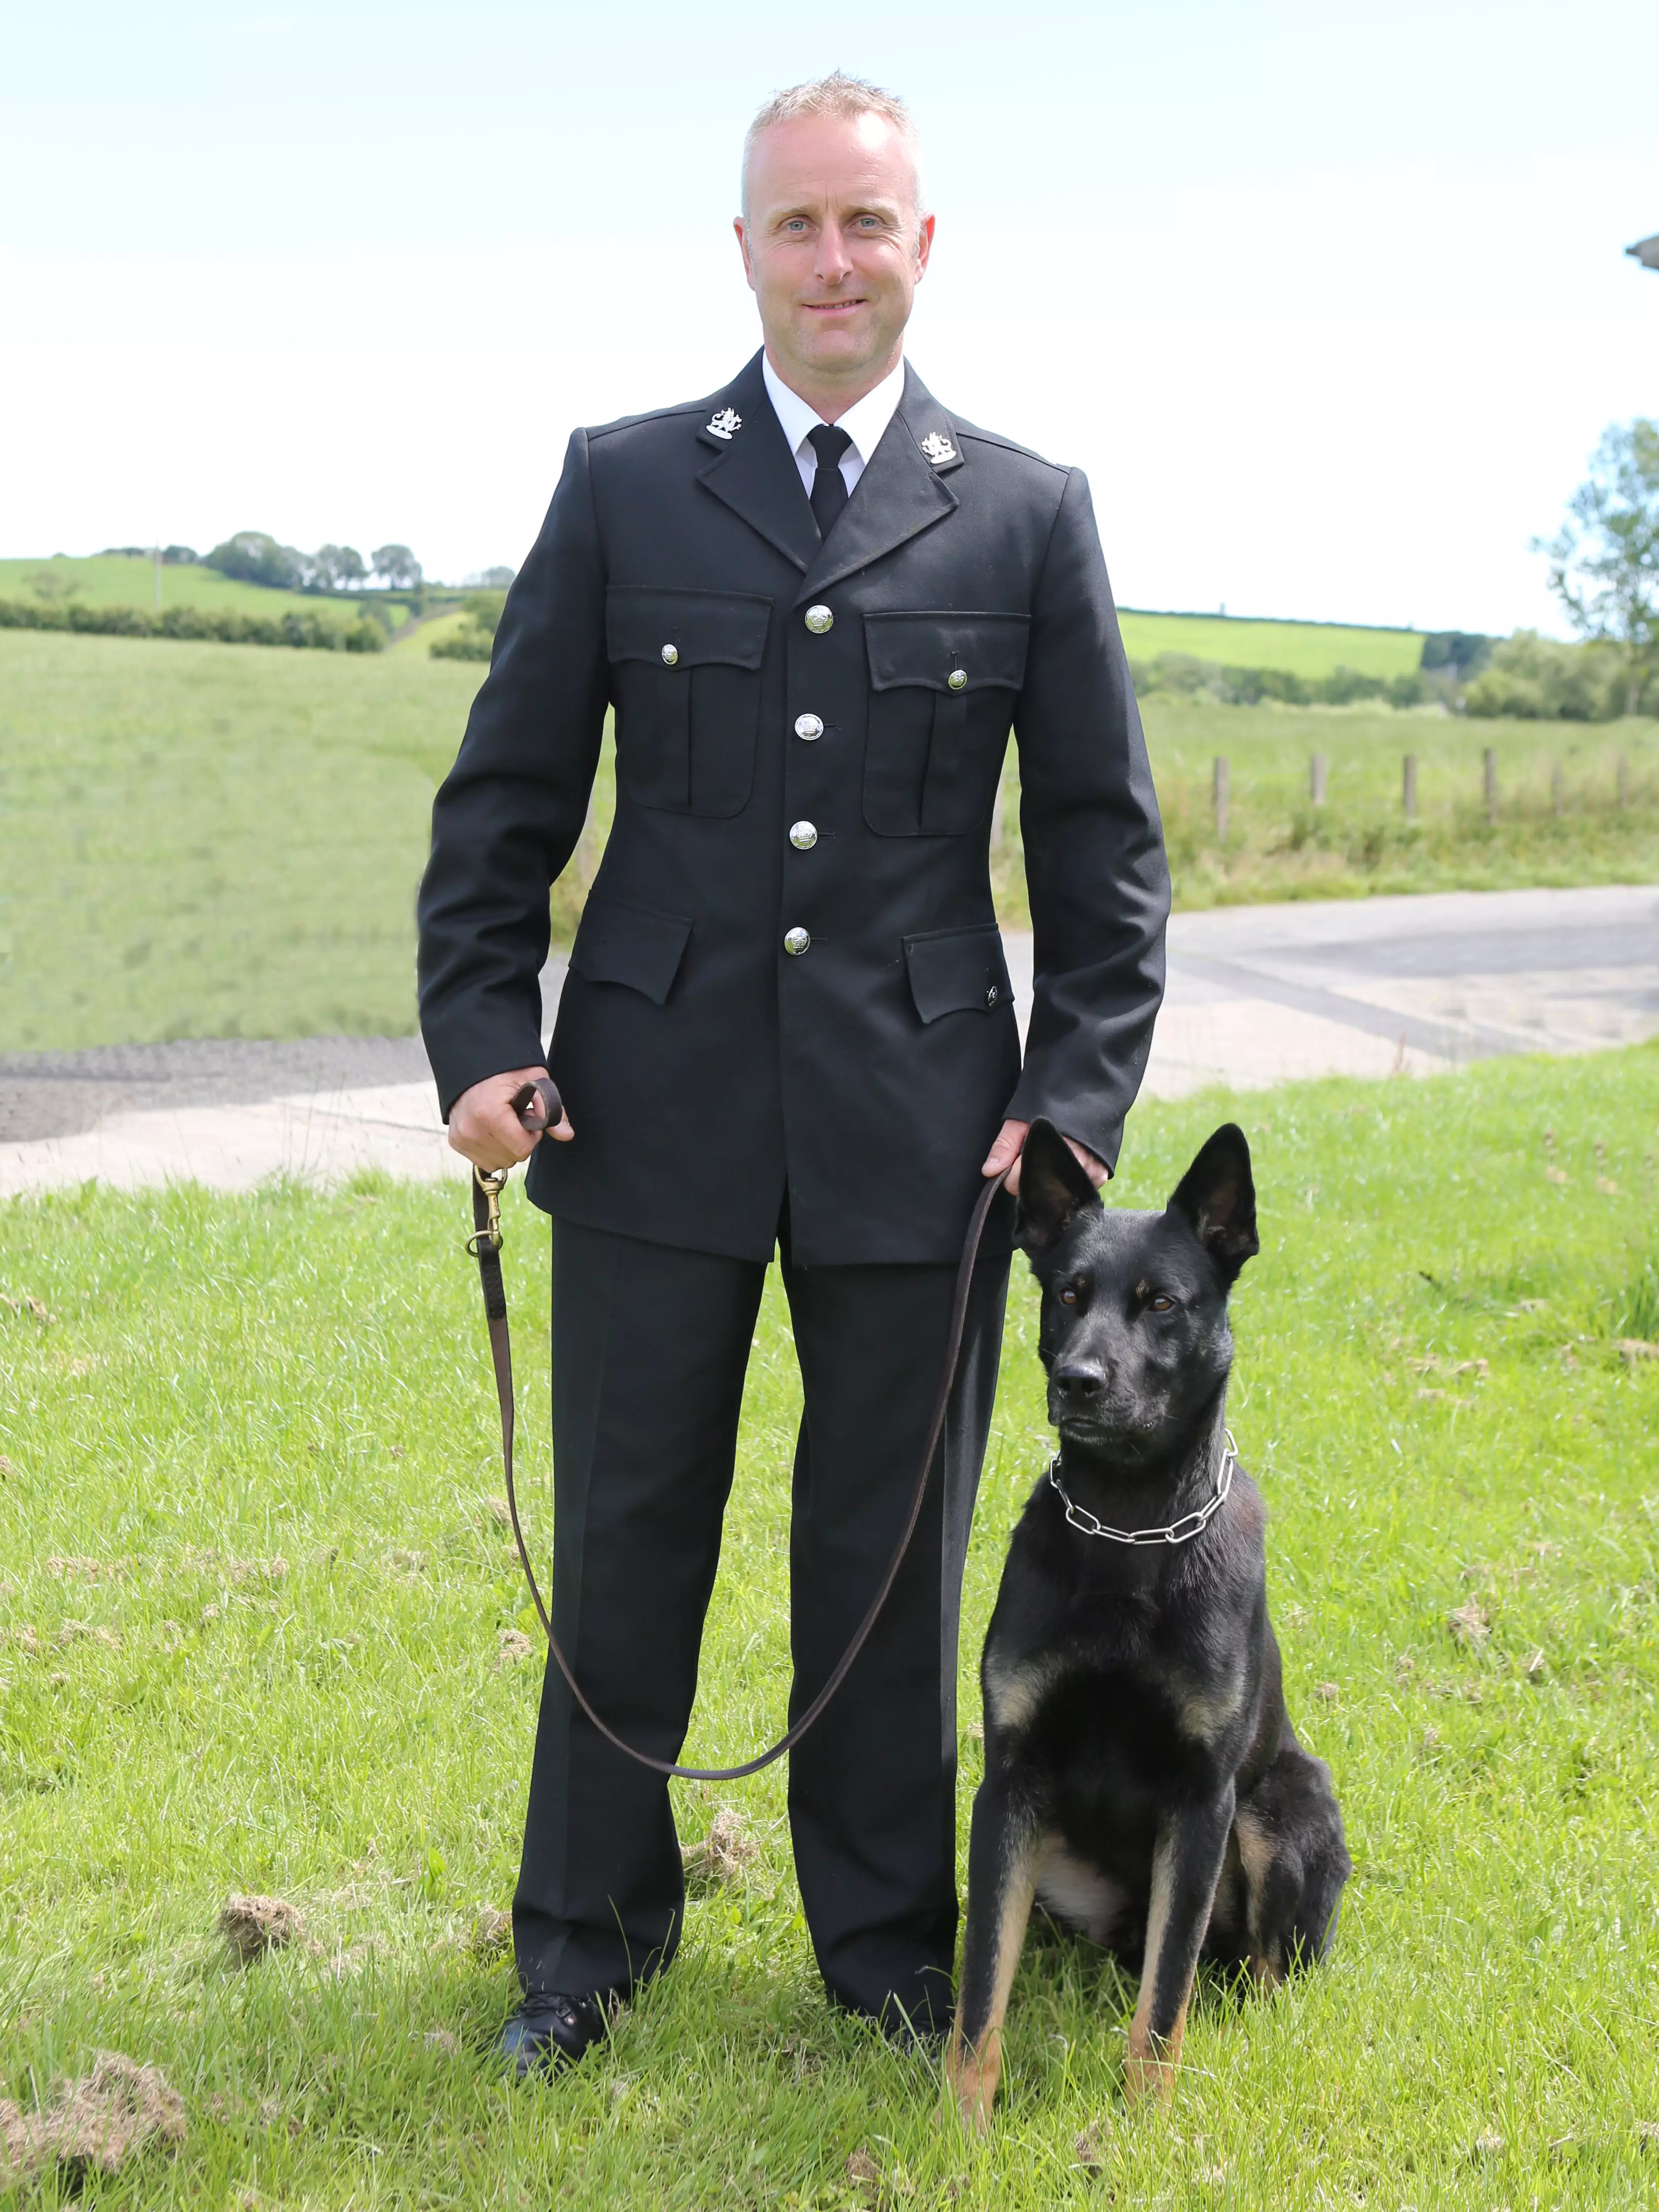 PC Peter Lloyd and PD Max tracked down a missing mother and child.